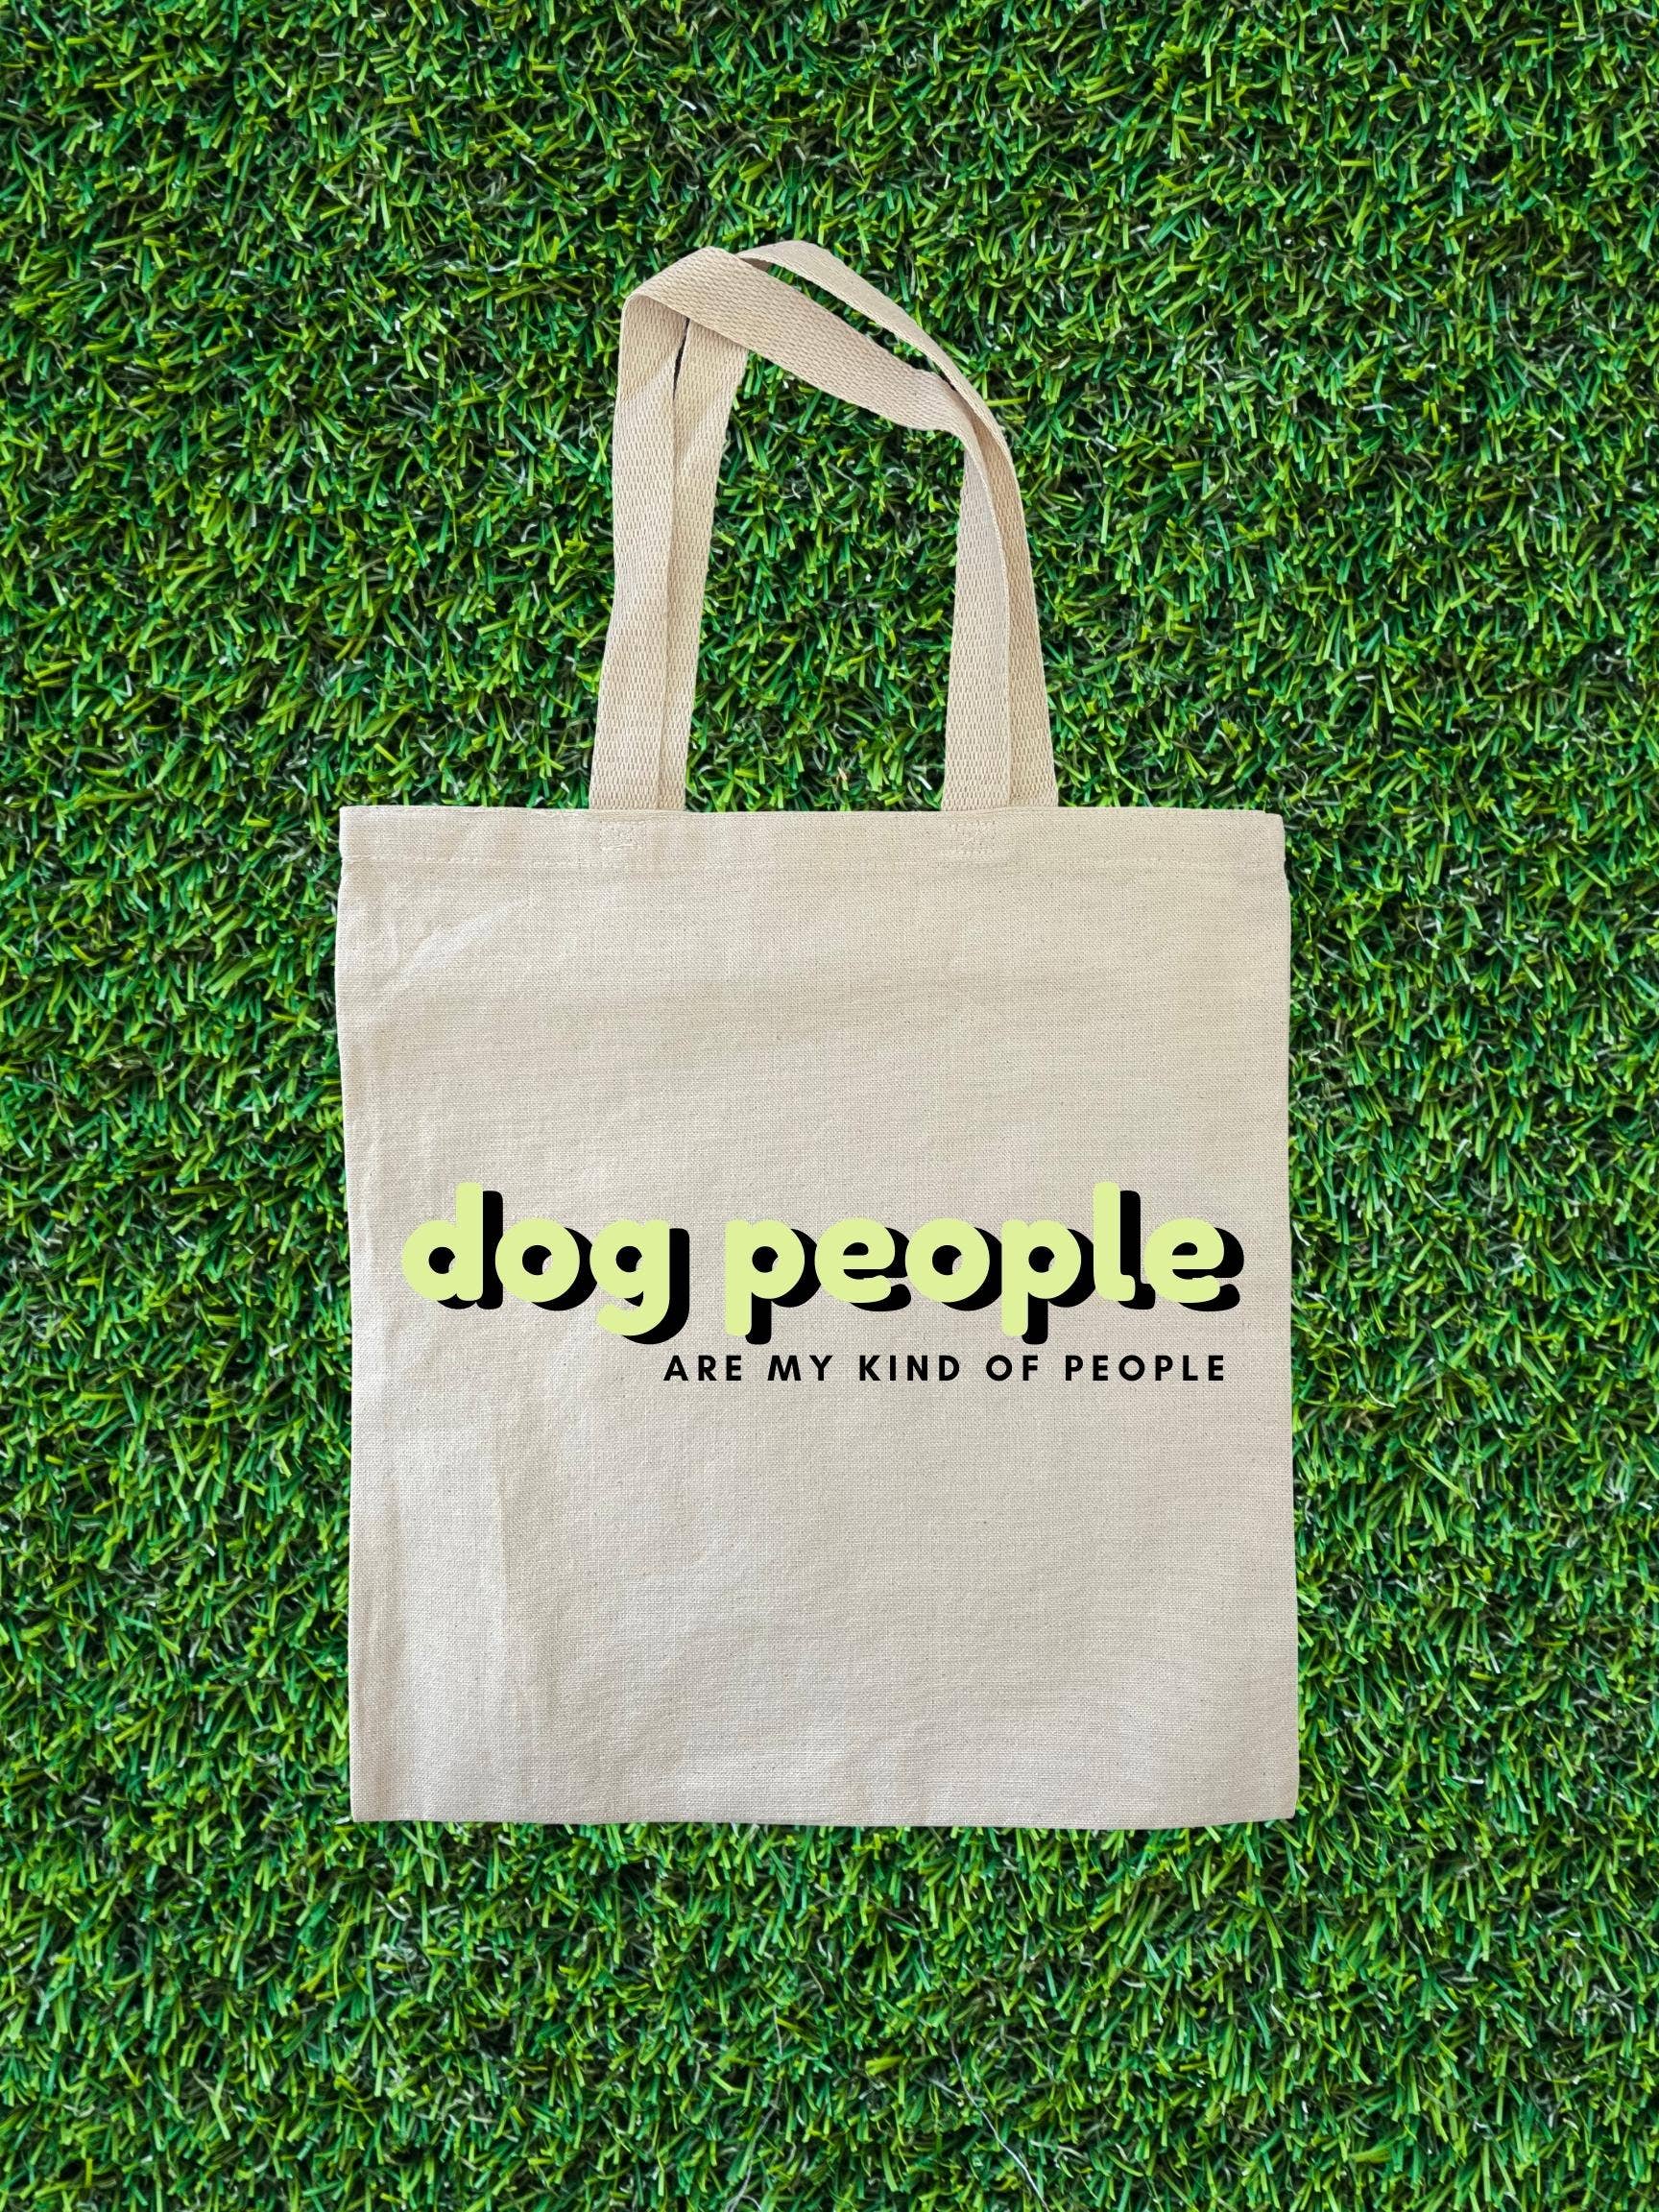 Dog People Are My Kind of People Tote Bag